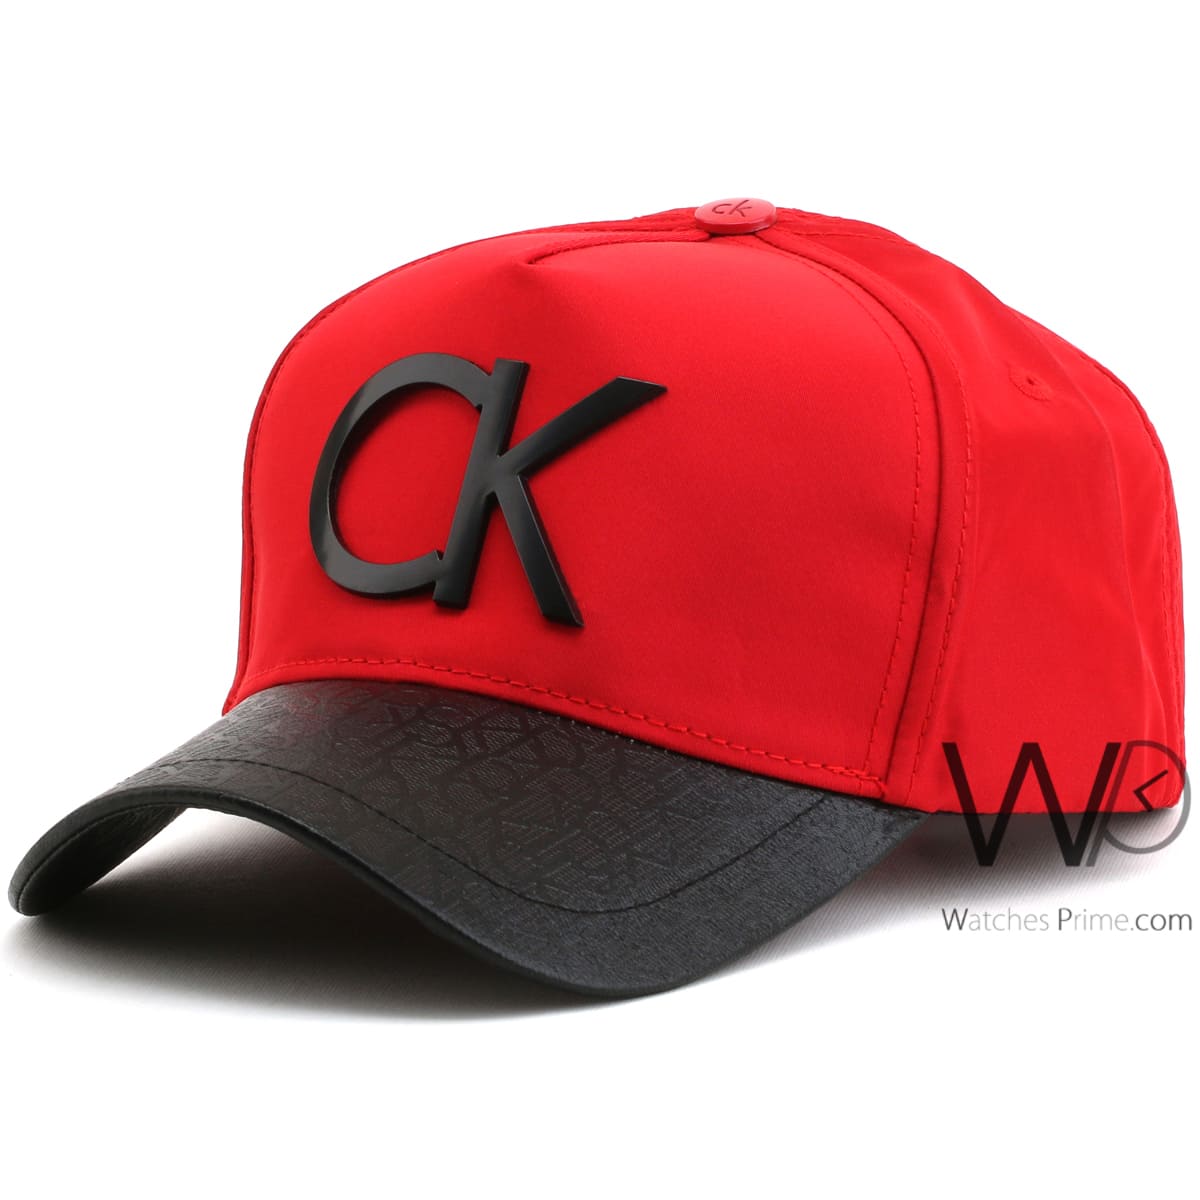 Calvin Klein CK red and black cap for men | Watches Prime